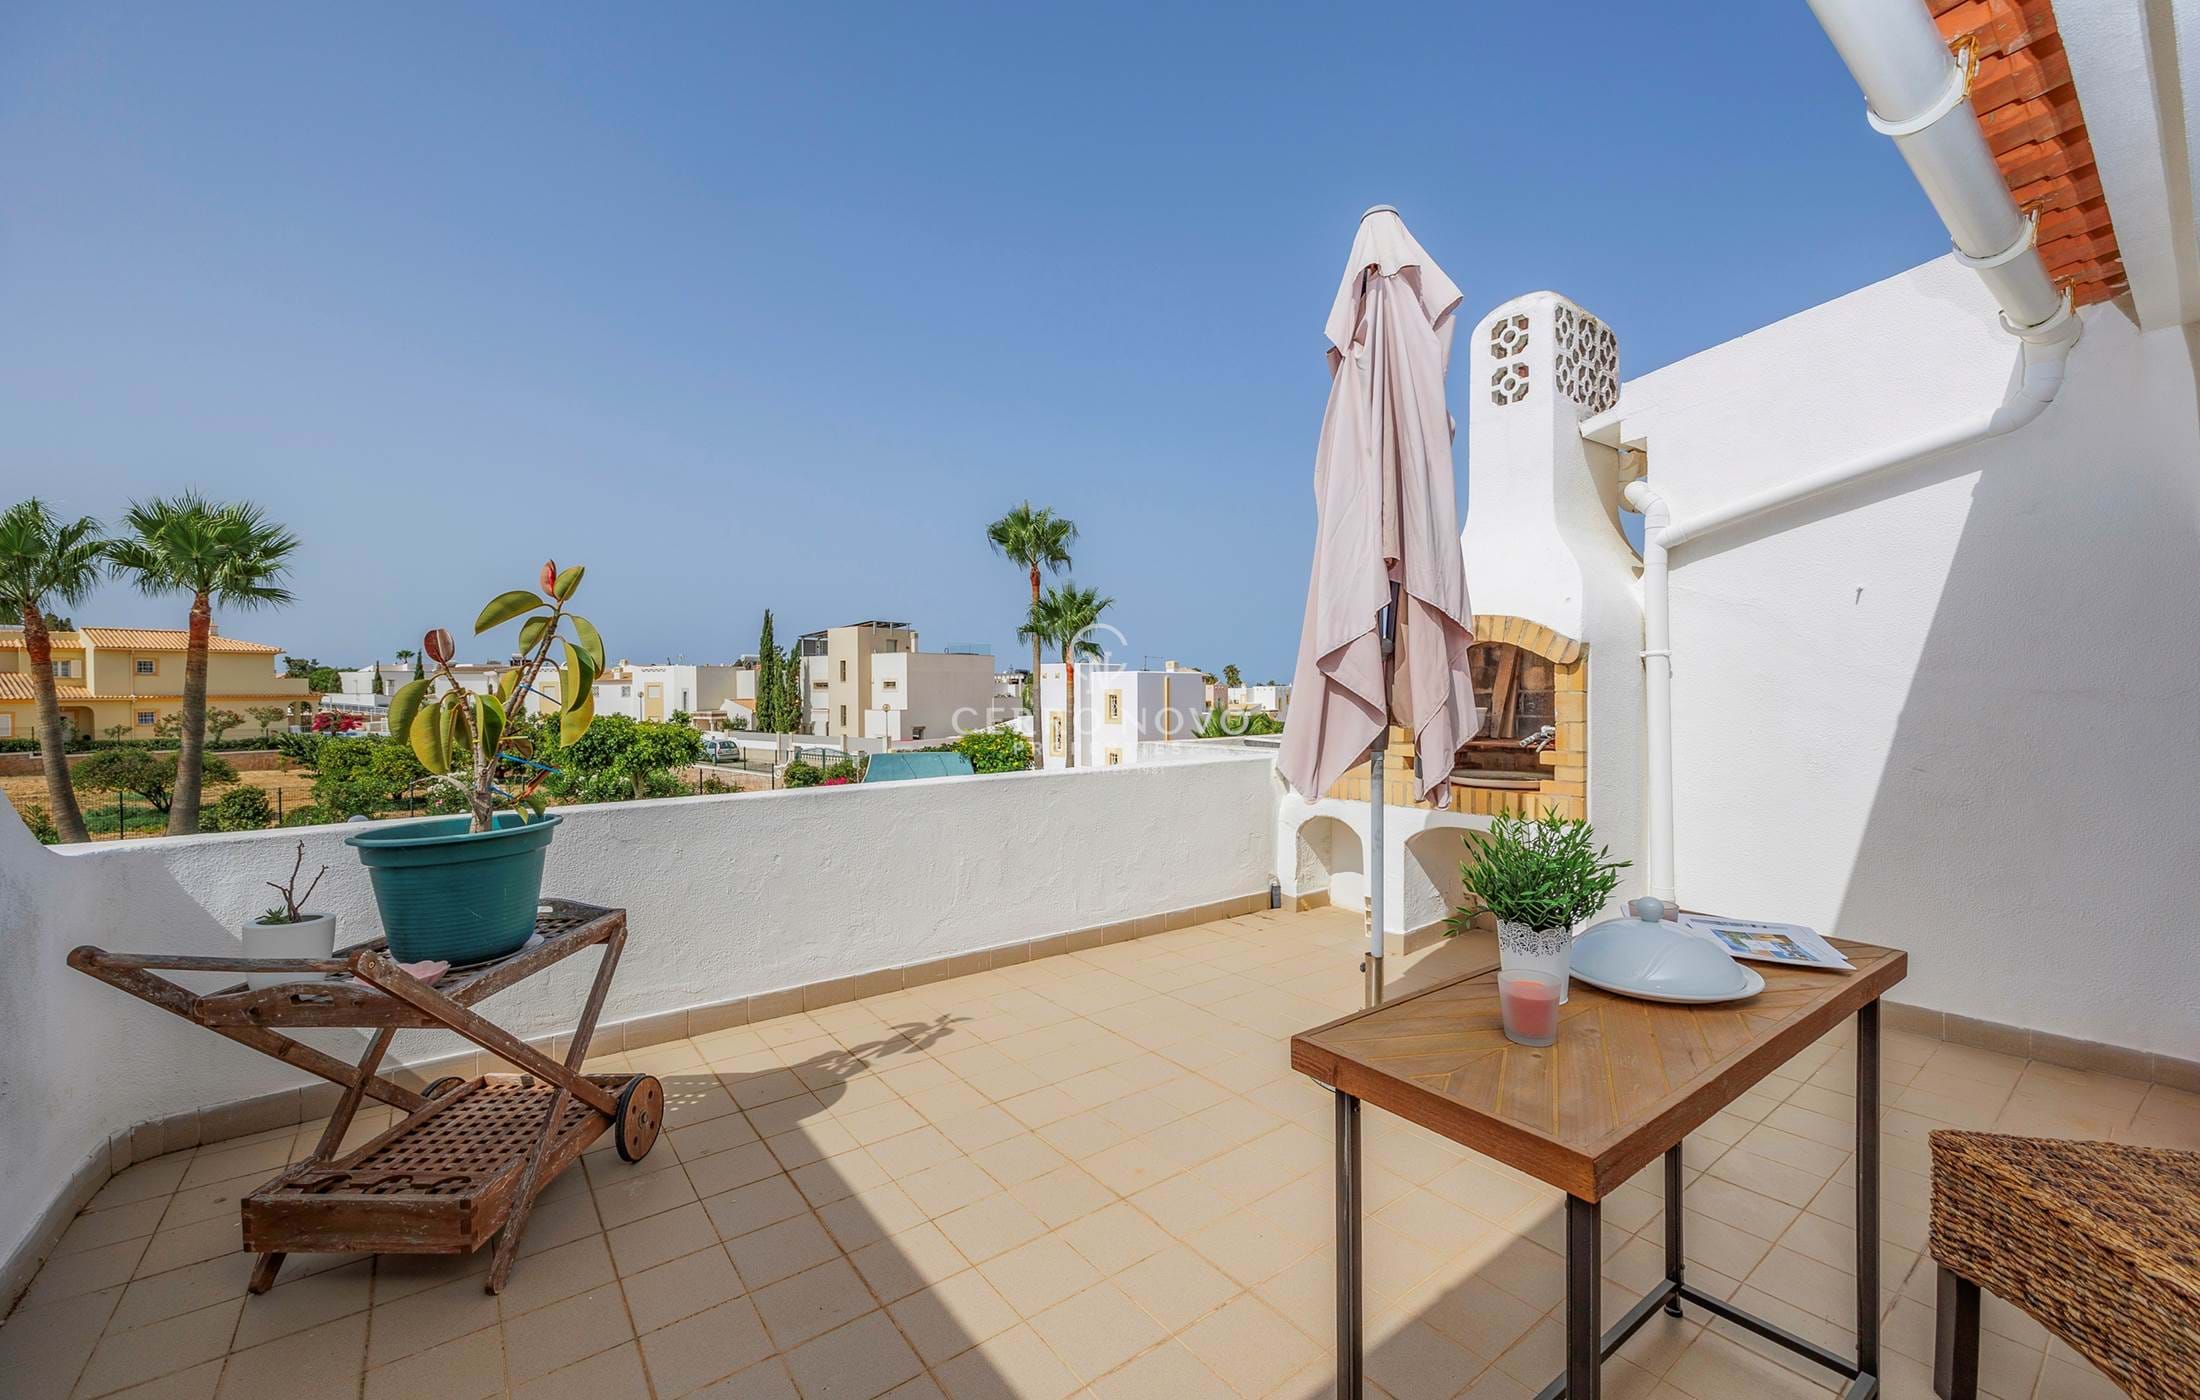 A lovely one bedroom apartment with large terrace and great communal pool & garden